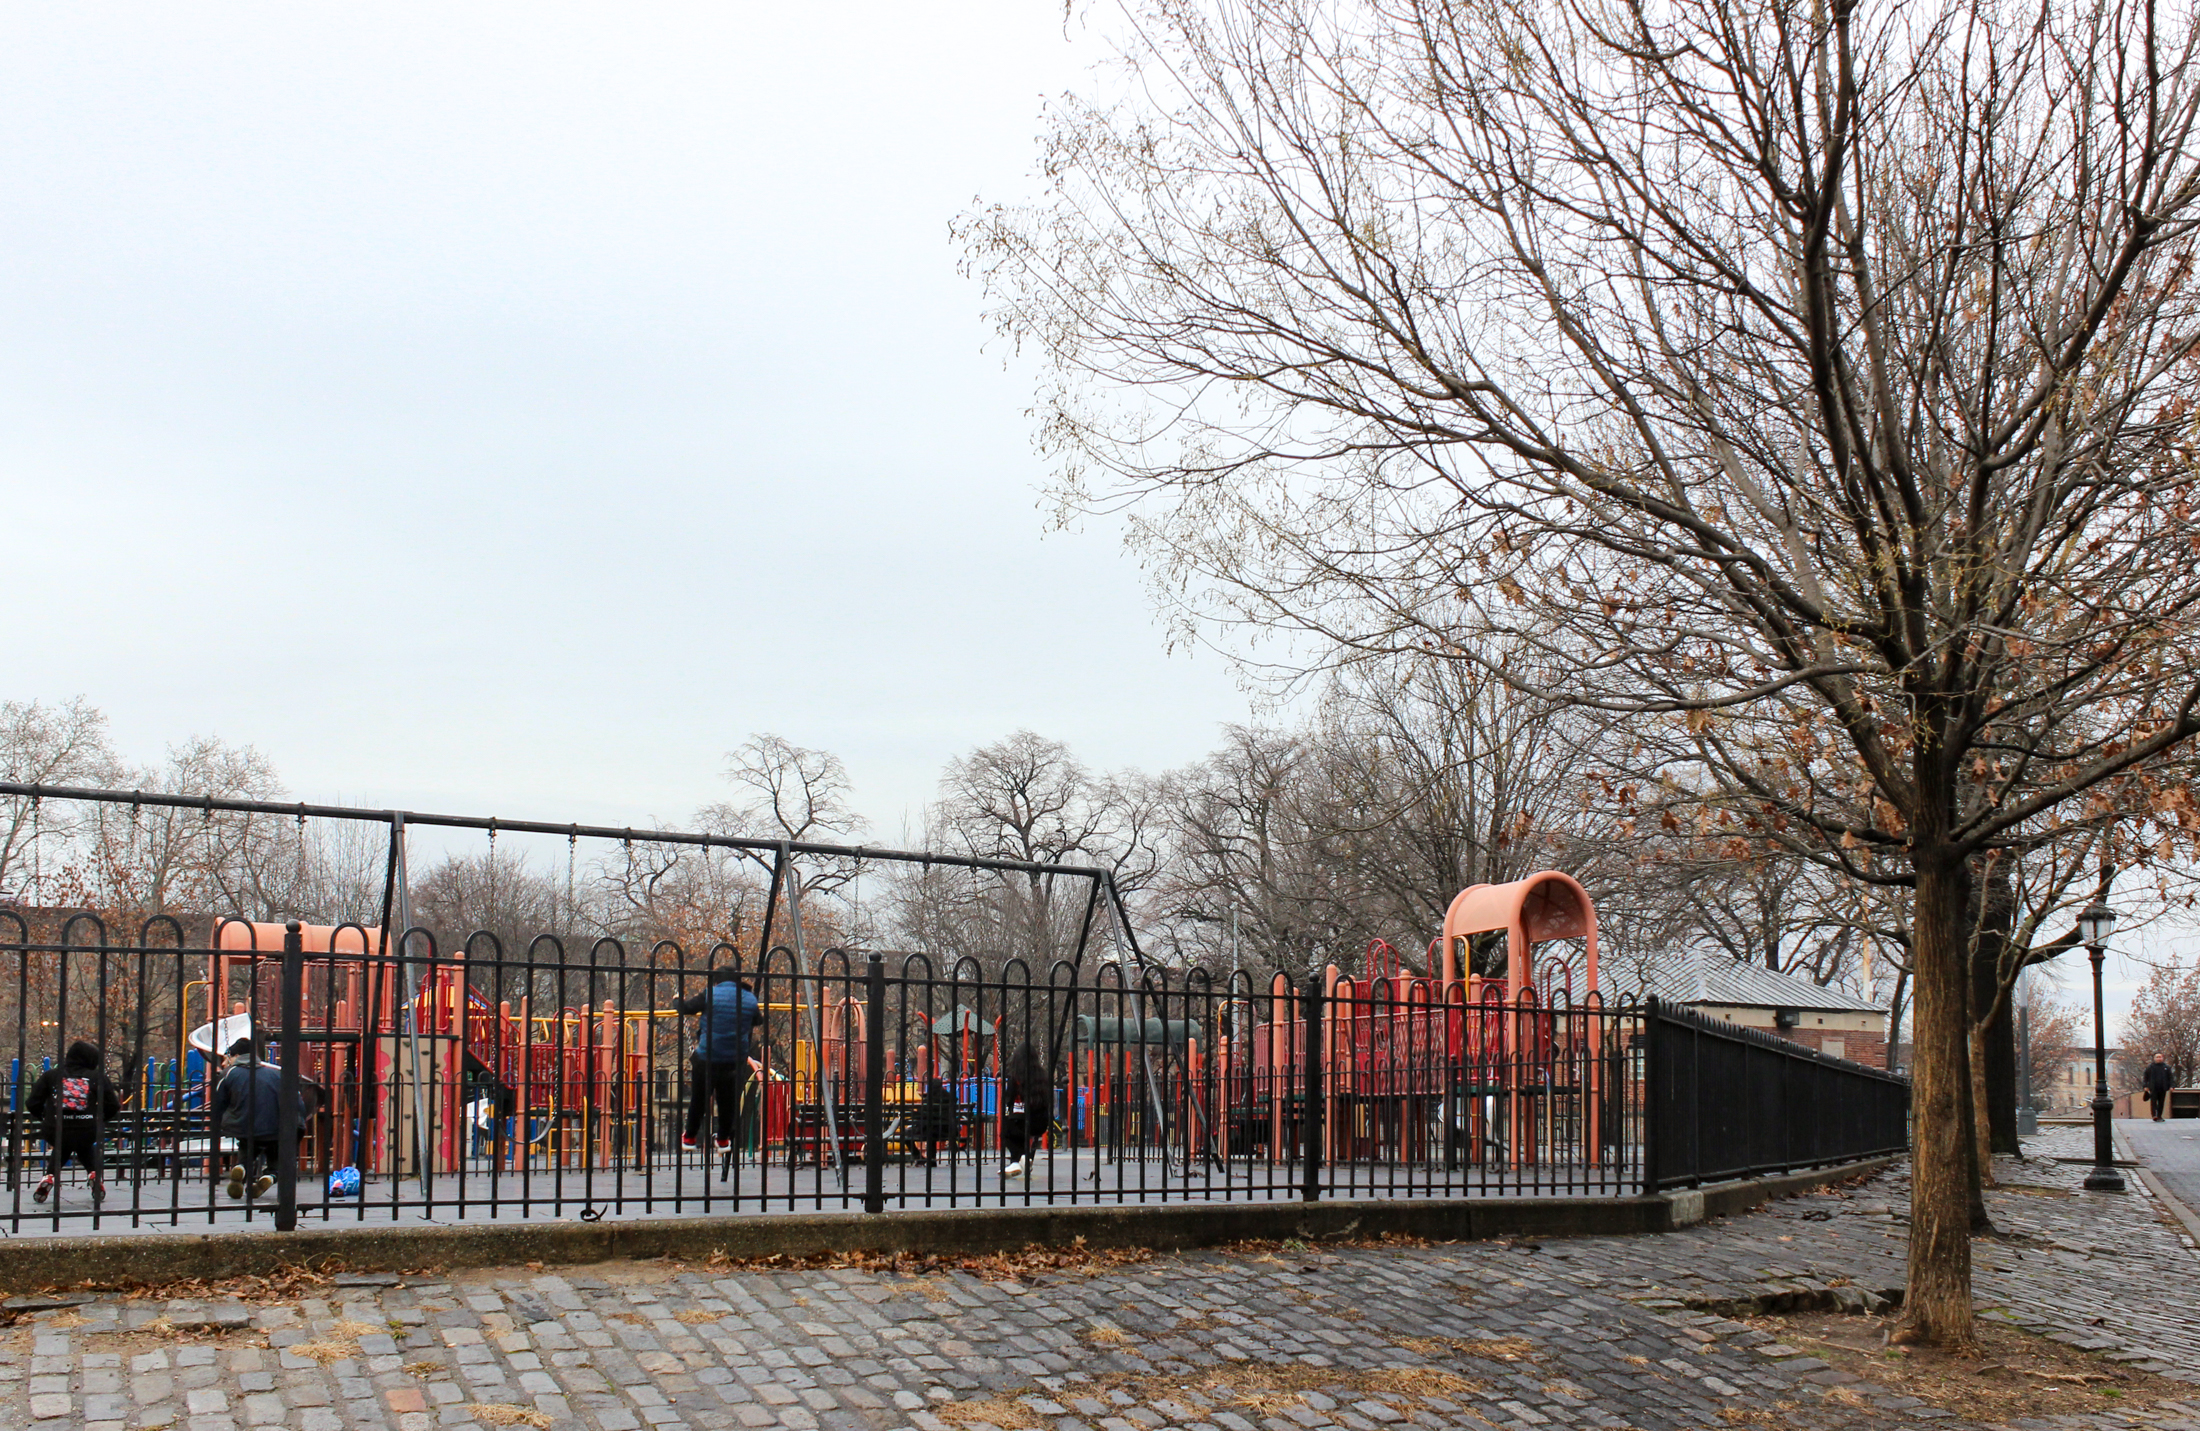 fence around the playground with glimpse of equipment